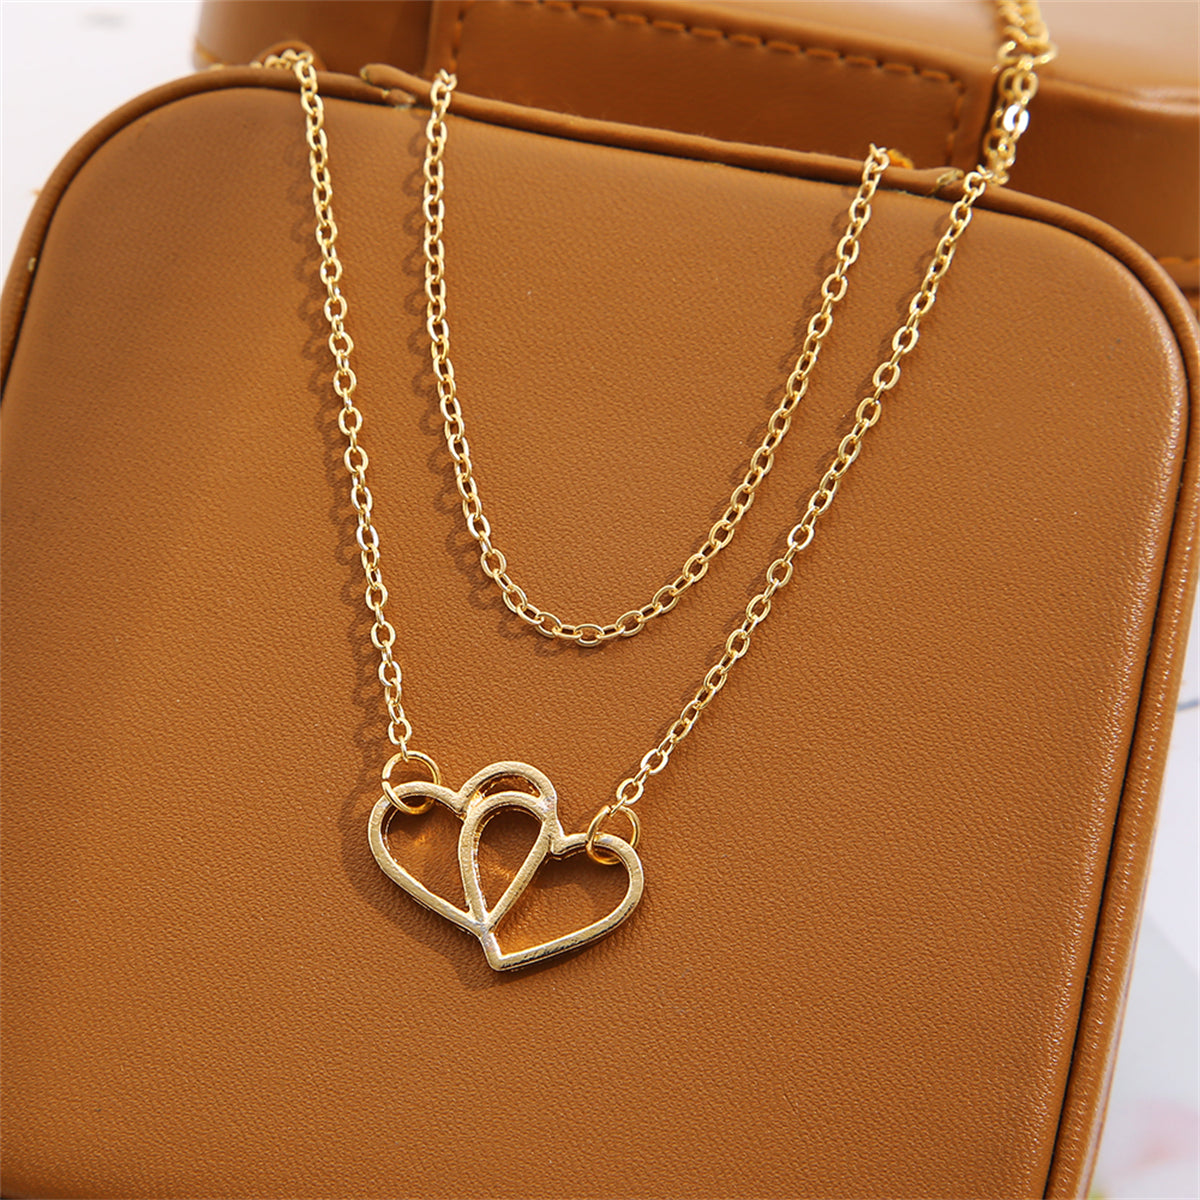 18K Gold-Plated Interlocked Heart Layered Chain Anklet